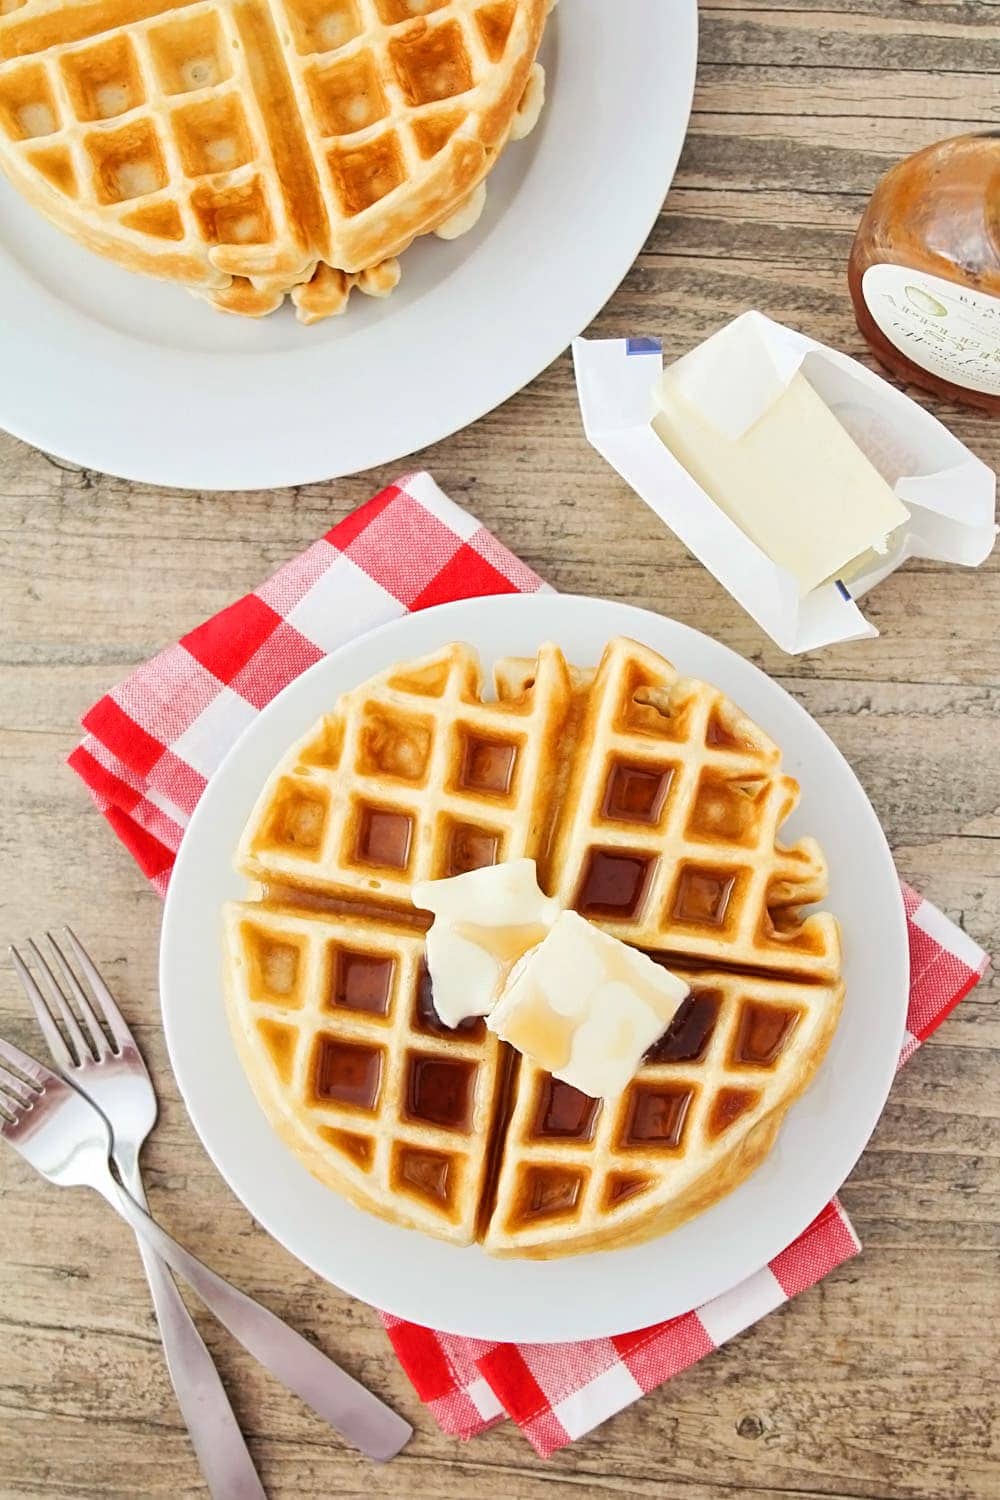 A plate of waffles